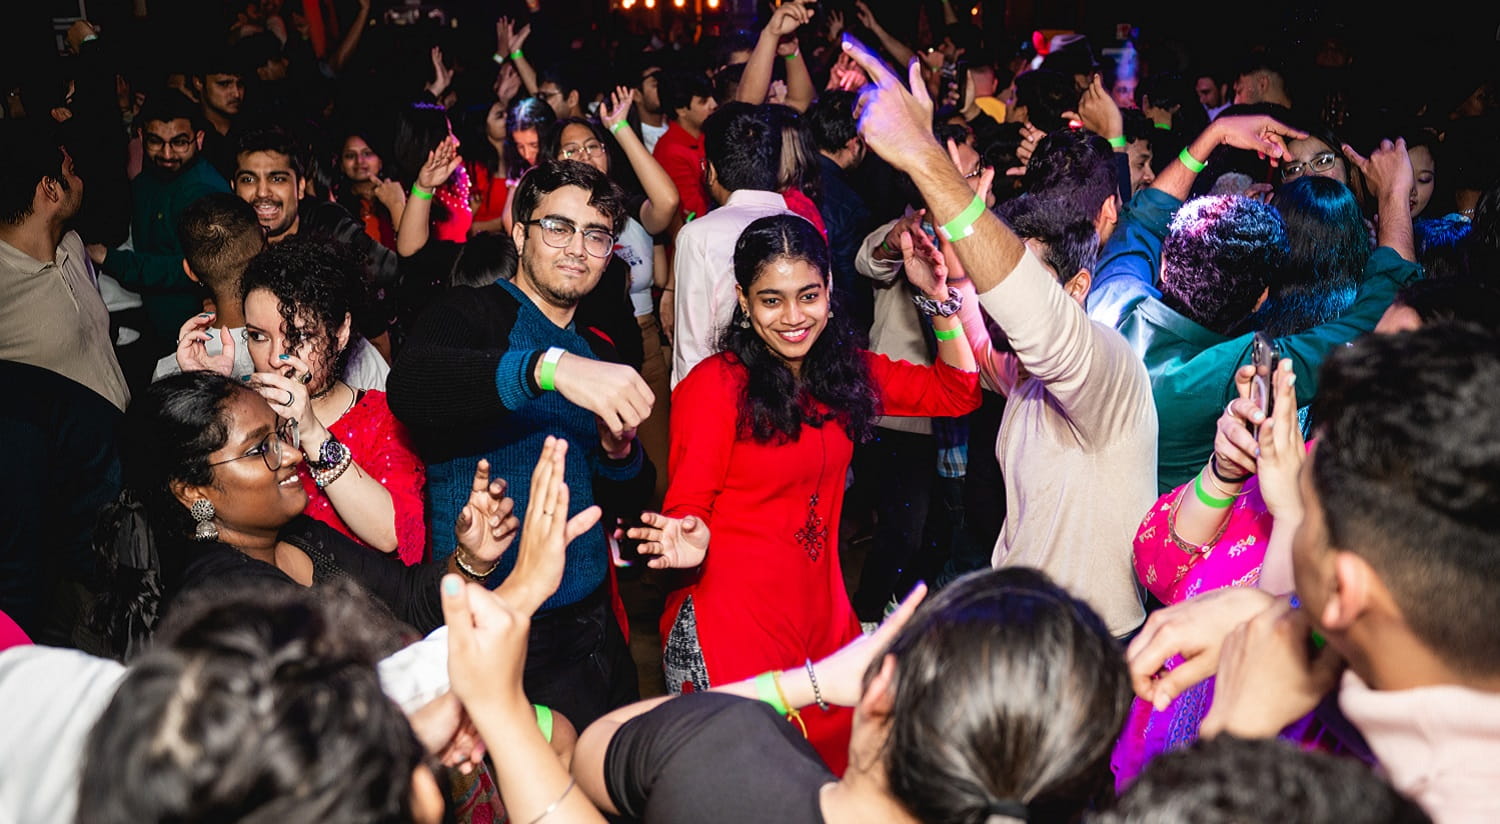 International students hit the dance floor at The In-Between)